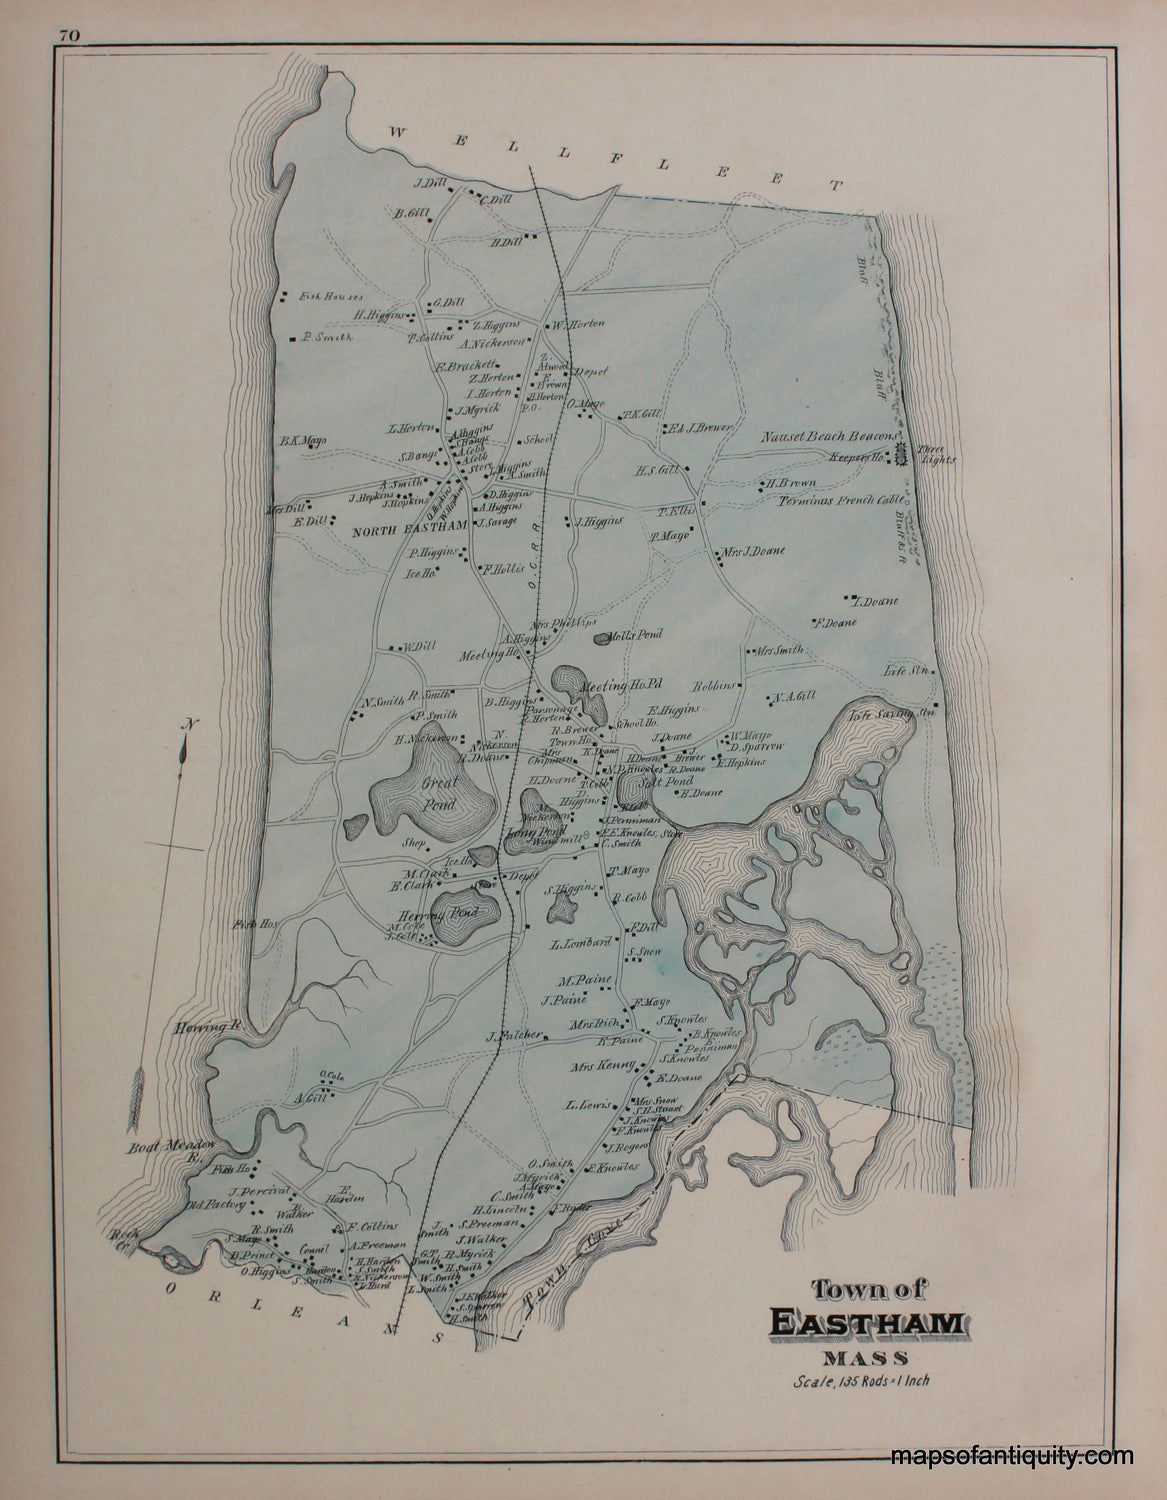 Reproduction-Map-Town-of-Eastham-p.-70-Town-and-Village-Maps-Atlas-of-Barnstable-County-Walker-1880.